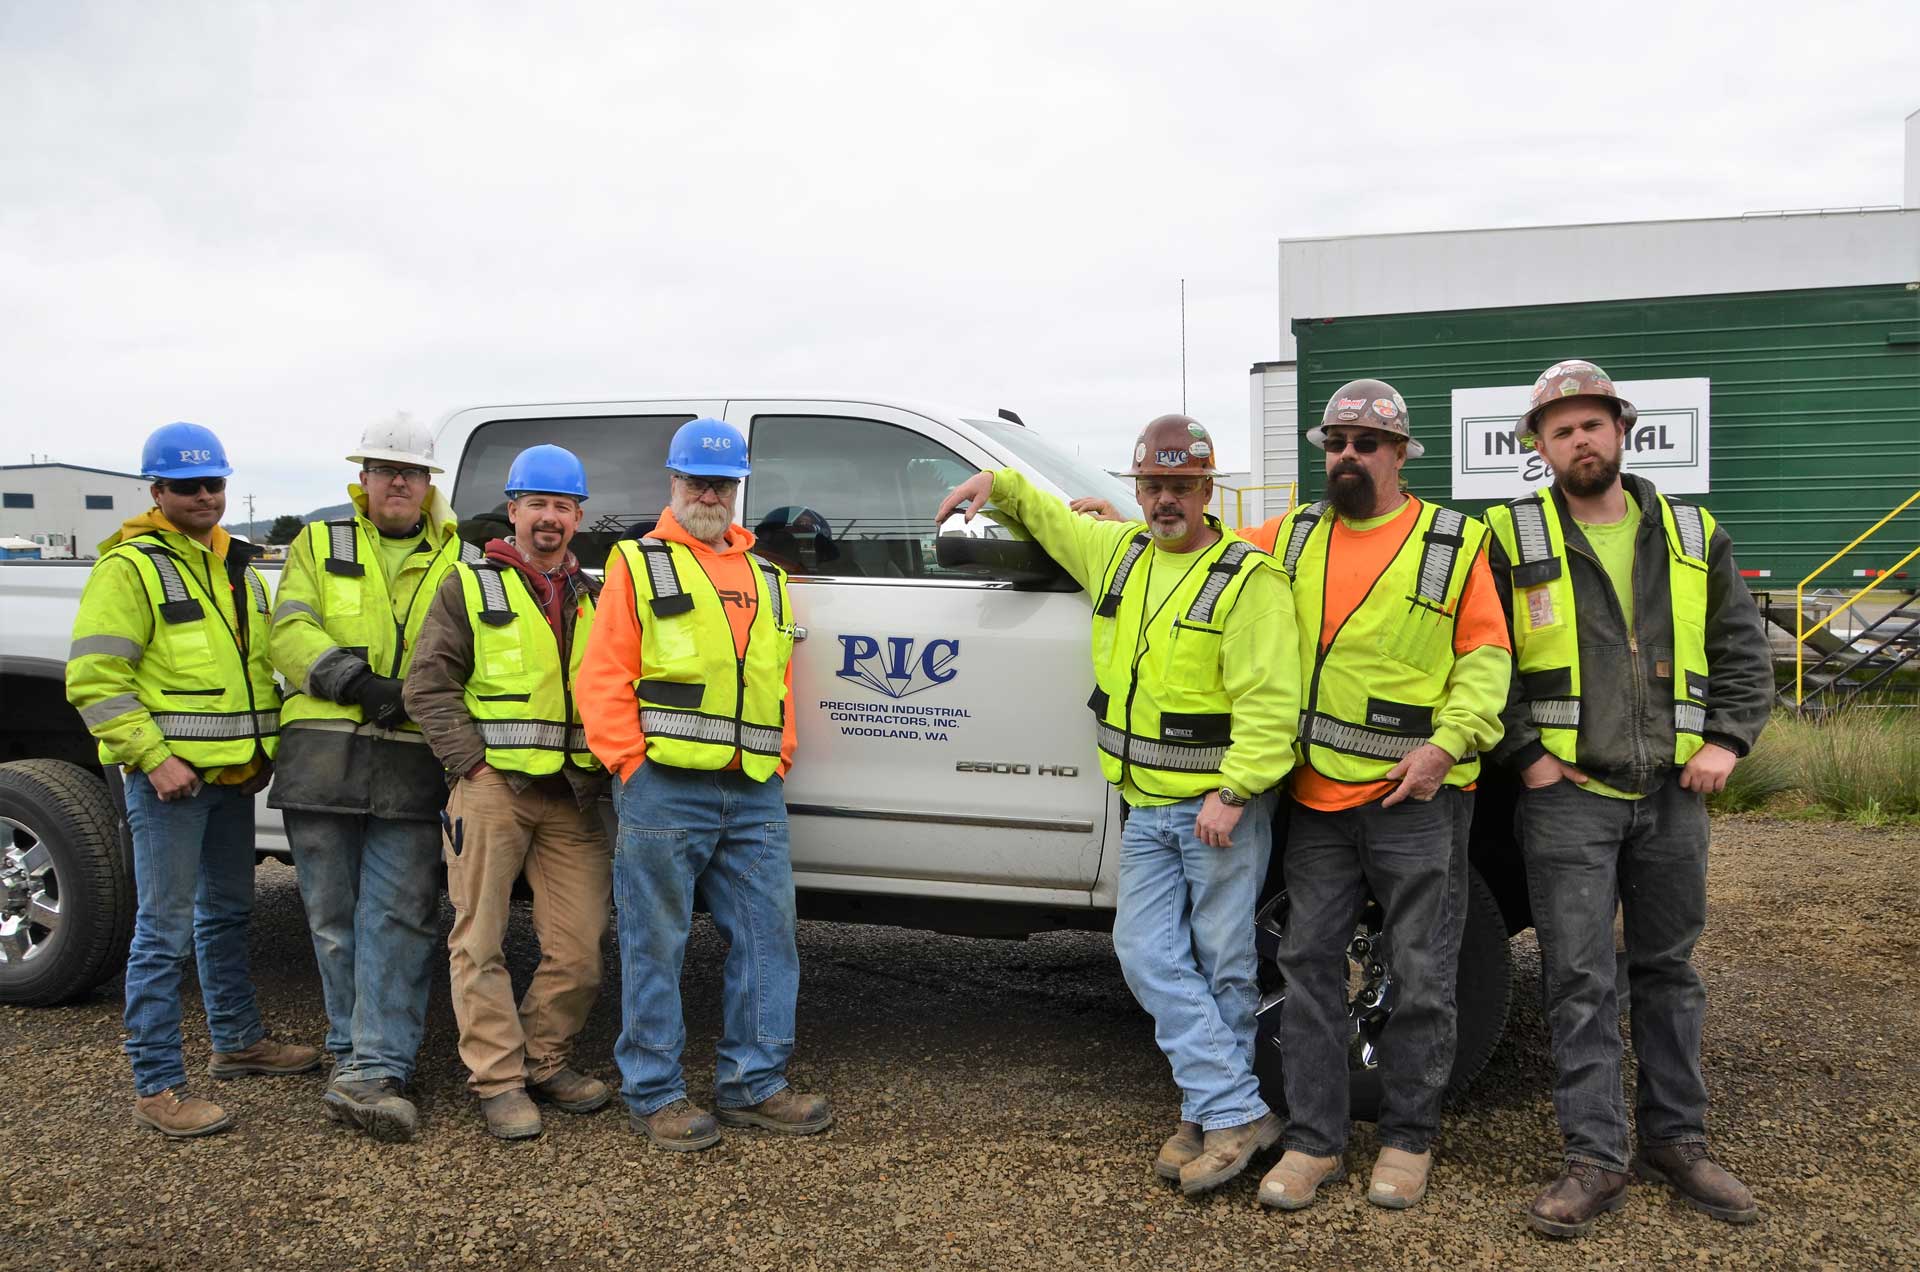 Picture of seven industrial workers standing in front of a pickup truck with the PIC logo